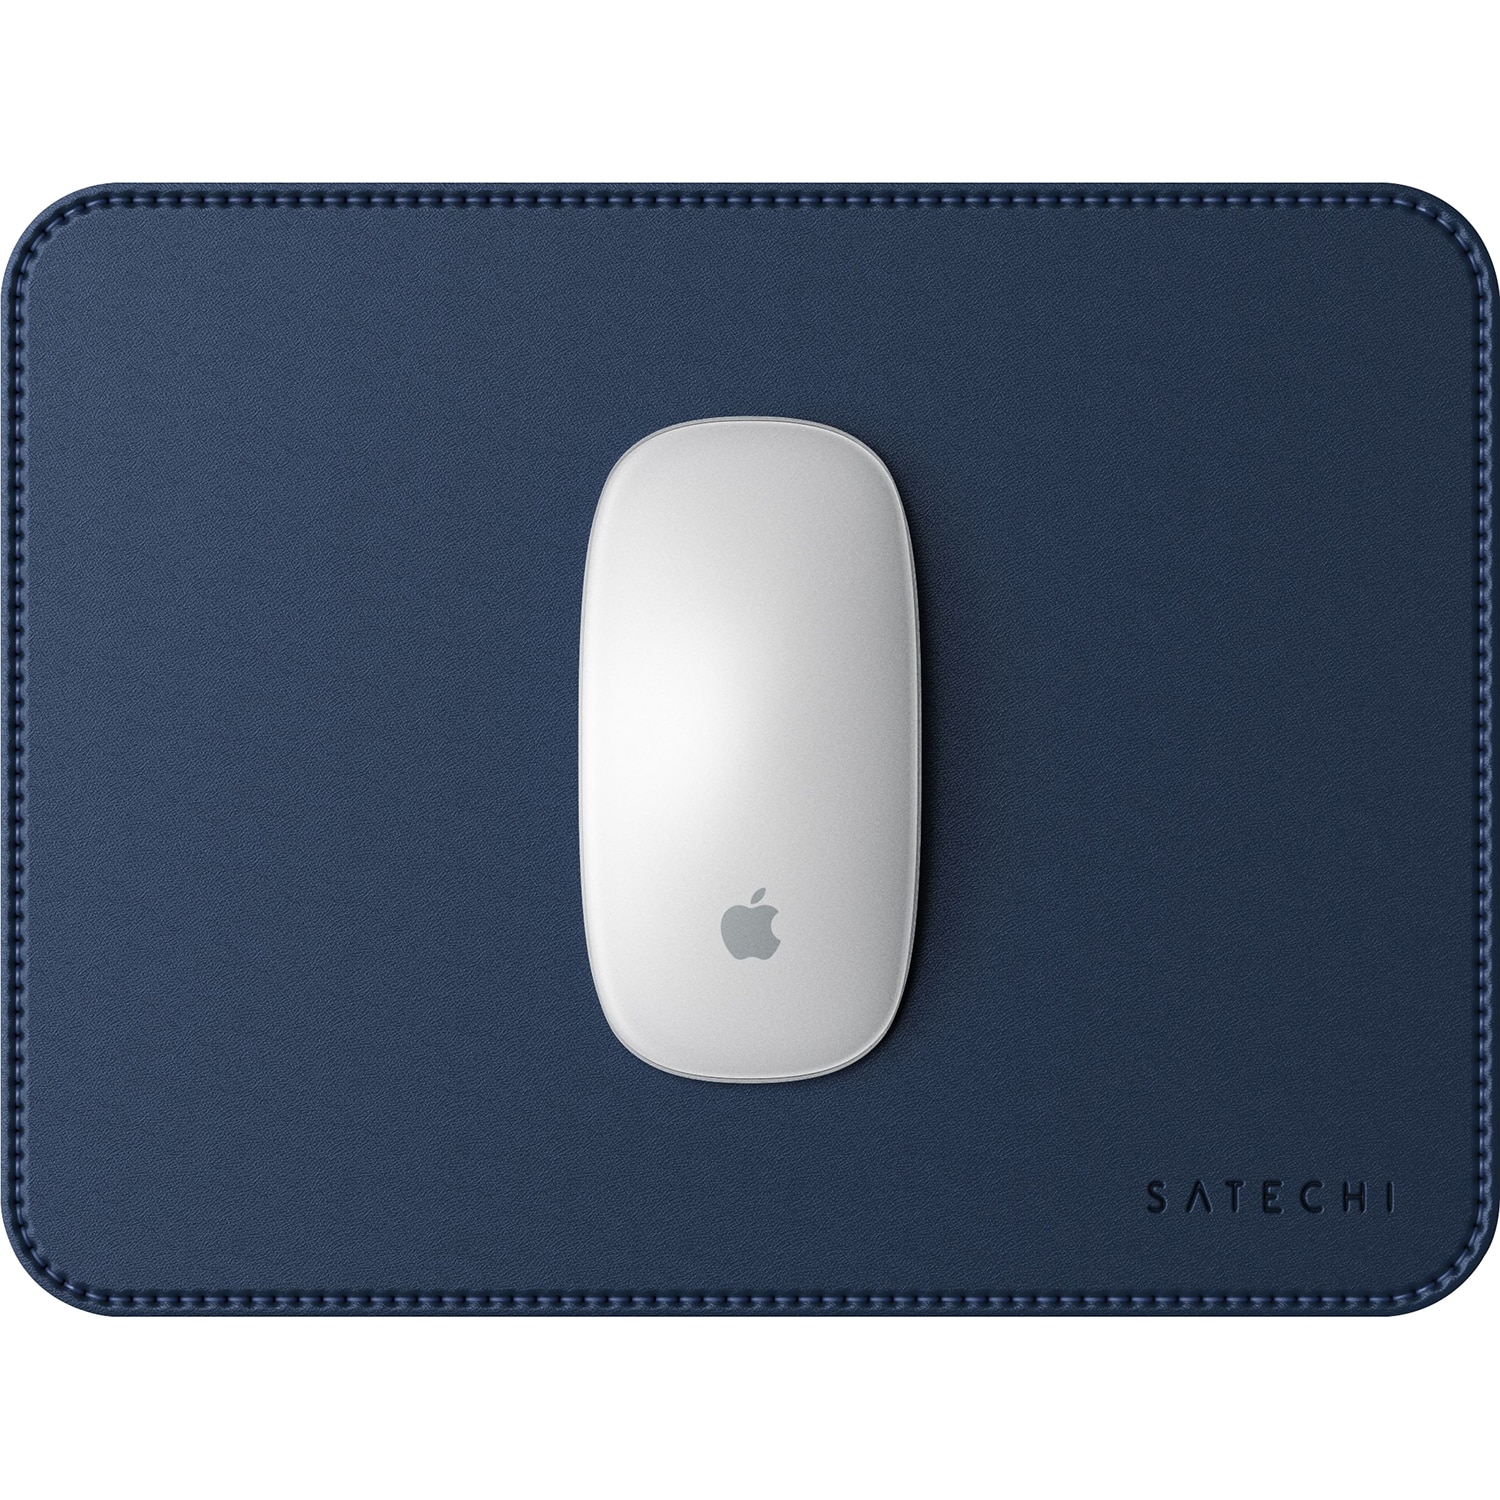 Satechi Eco Leather Mouse Pad- Dark Blue